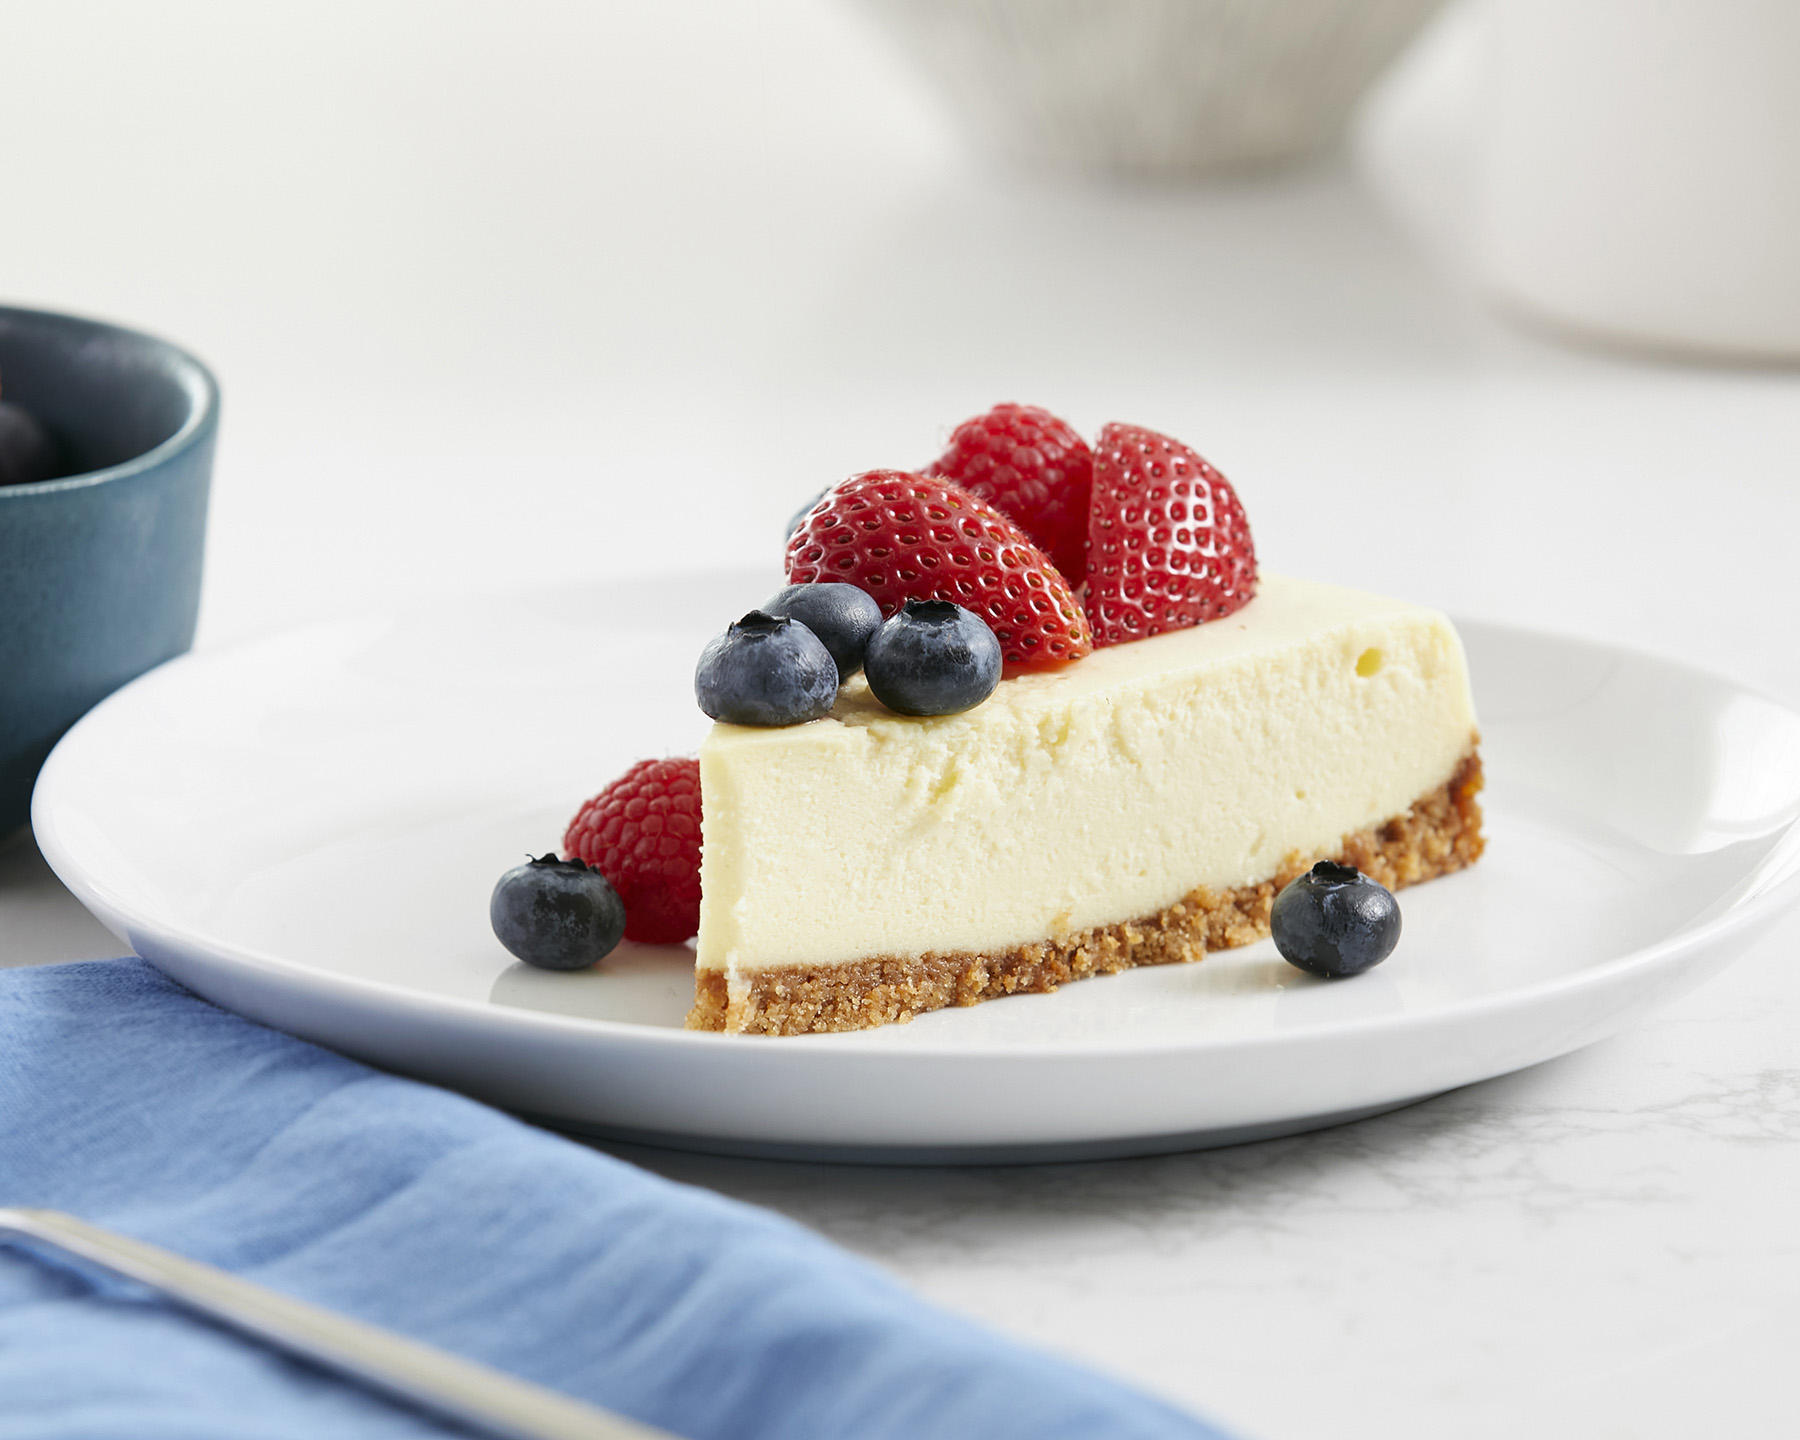 Cheesecake Product Photography by Sean D. Johnson